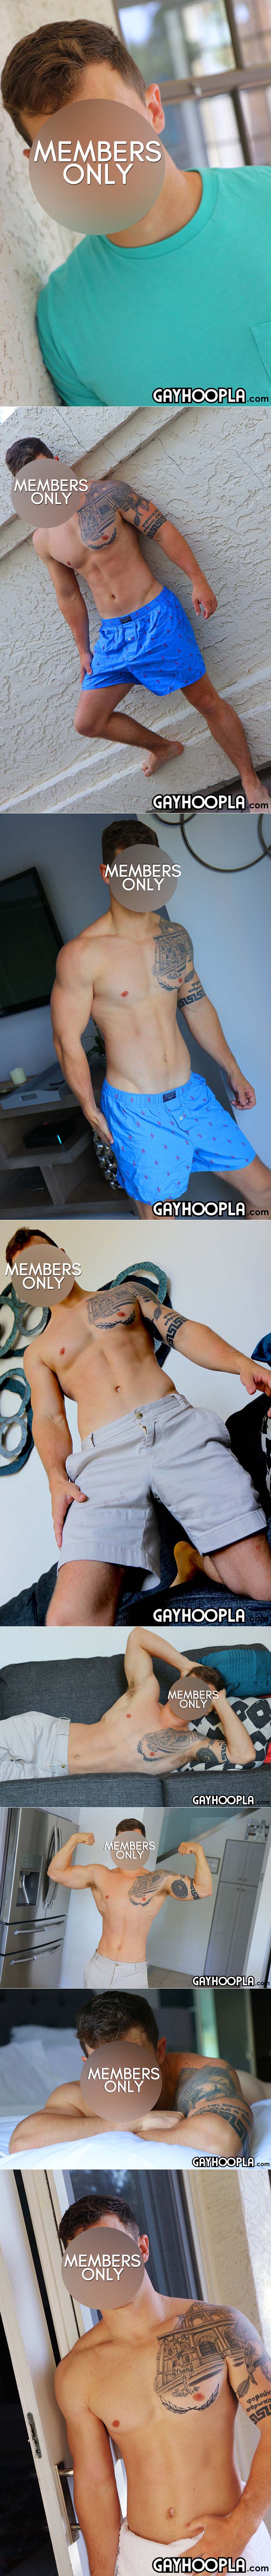 Mystery Members Only Model #12 at GayHoopla